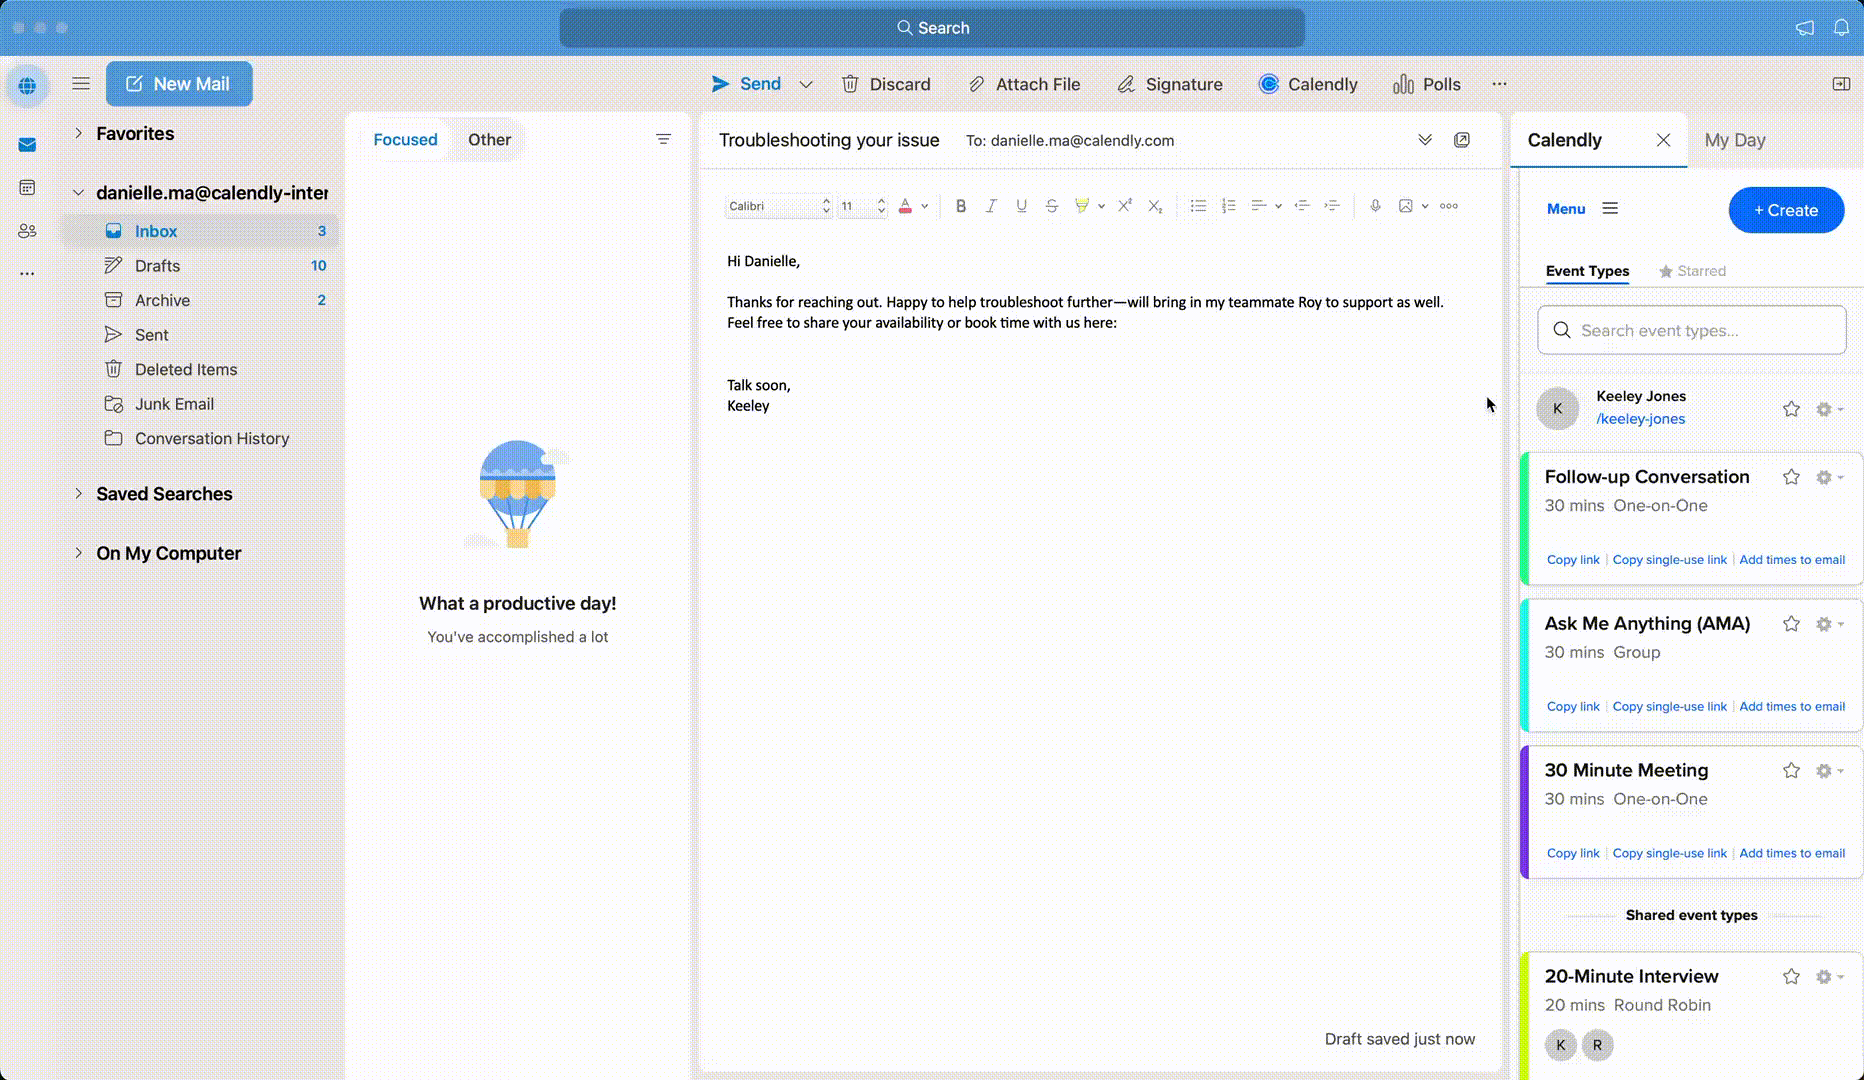 GIF showing the Calendly Outlook add-in in an Outlook inbox. The user searches for an Event Type, copies the link, and pastes it into the email body.